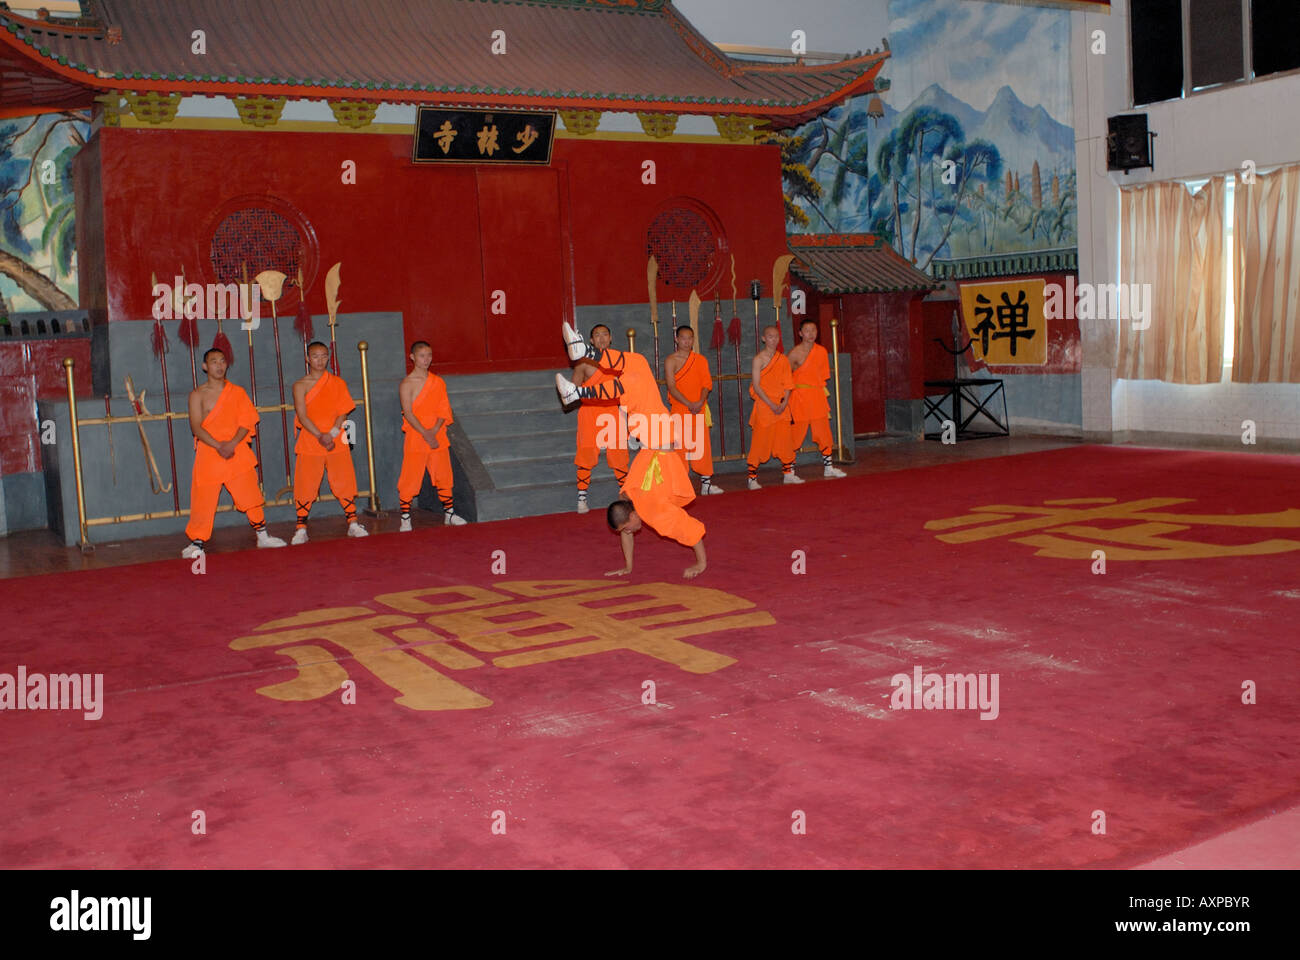 Group of Shaolin monks give a show of Martial Arts Kung Fu at Shaolin Kung Fu Exhibition Hall Near Shaolin Buddhist Monastery Stock Photo